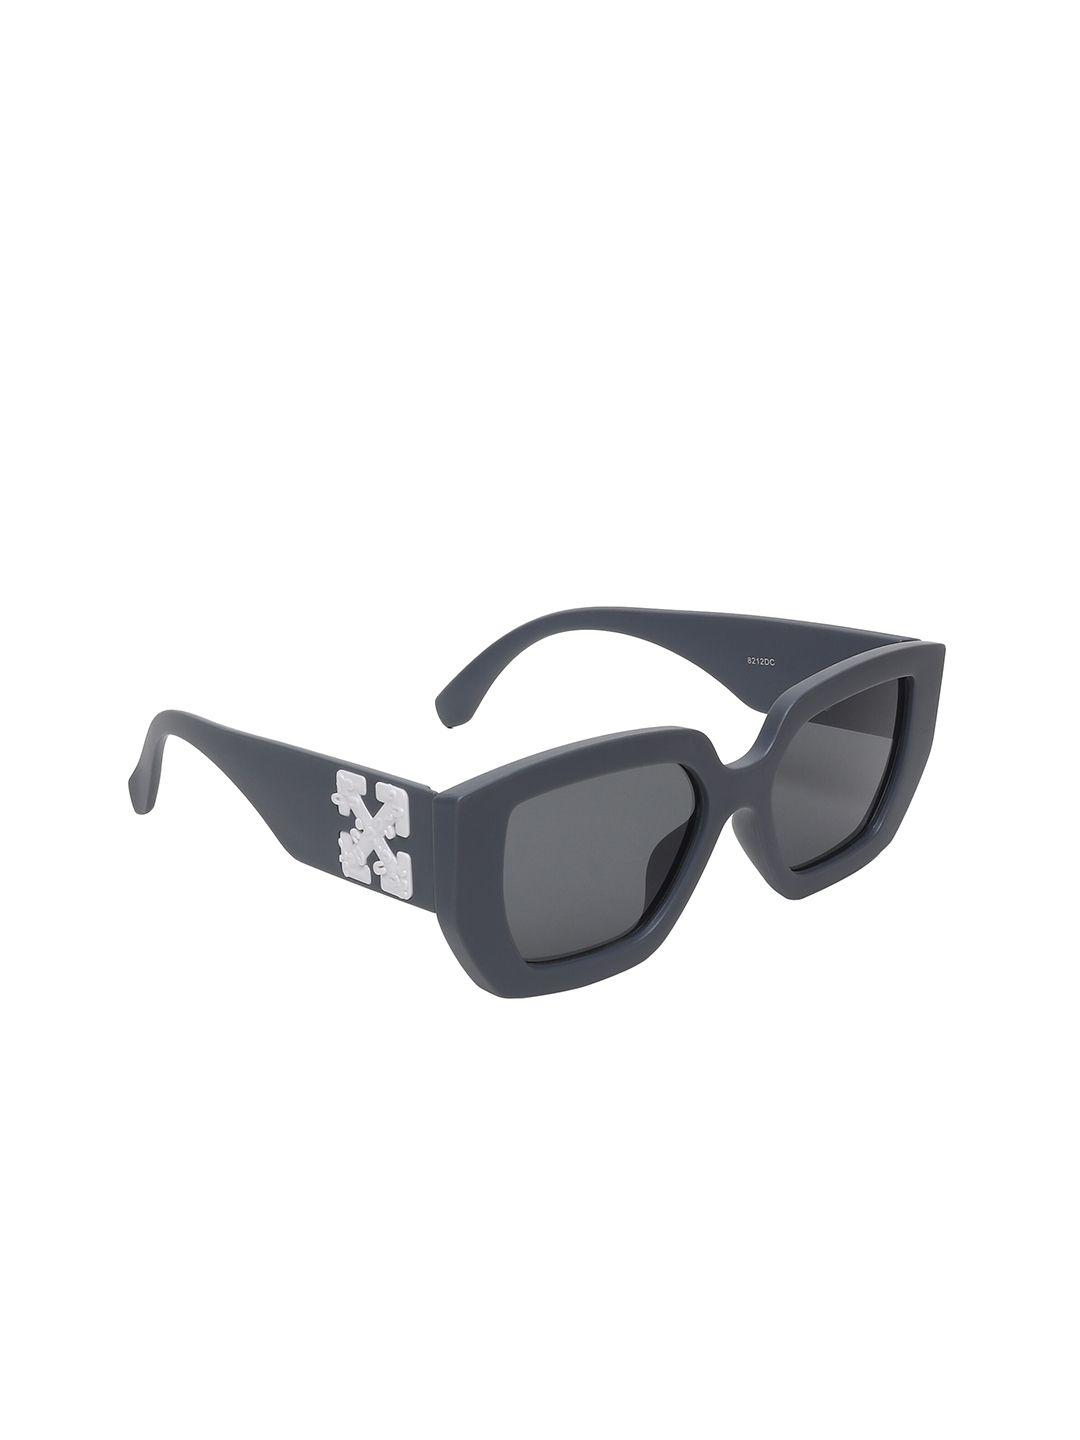 swiss design unisex grey lens & gunmetal-toned other sunglasses with uv protected lens